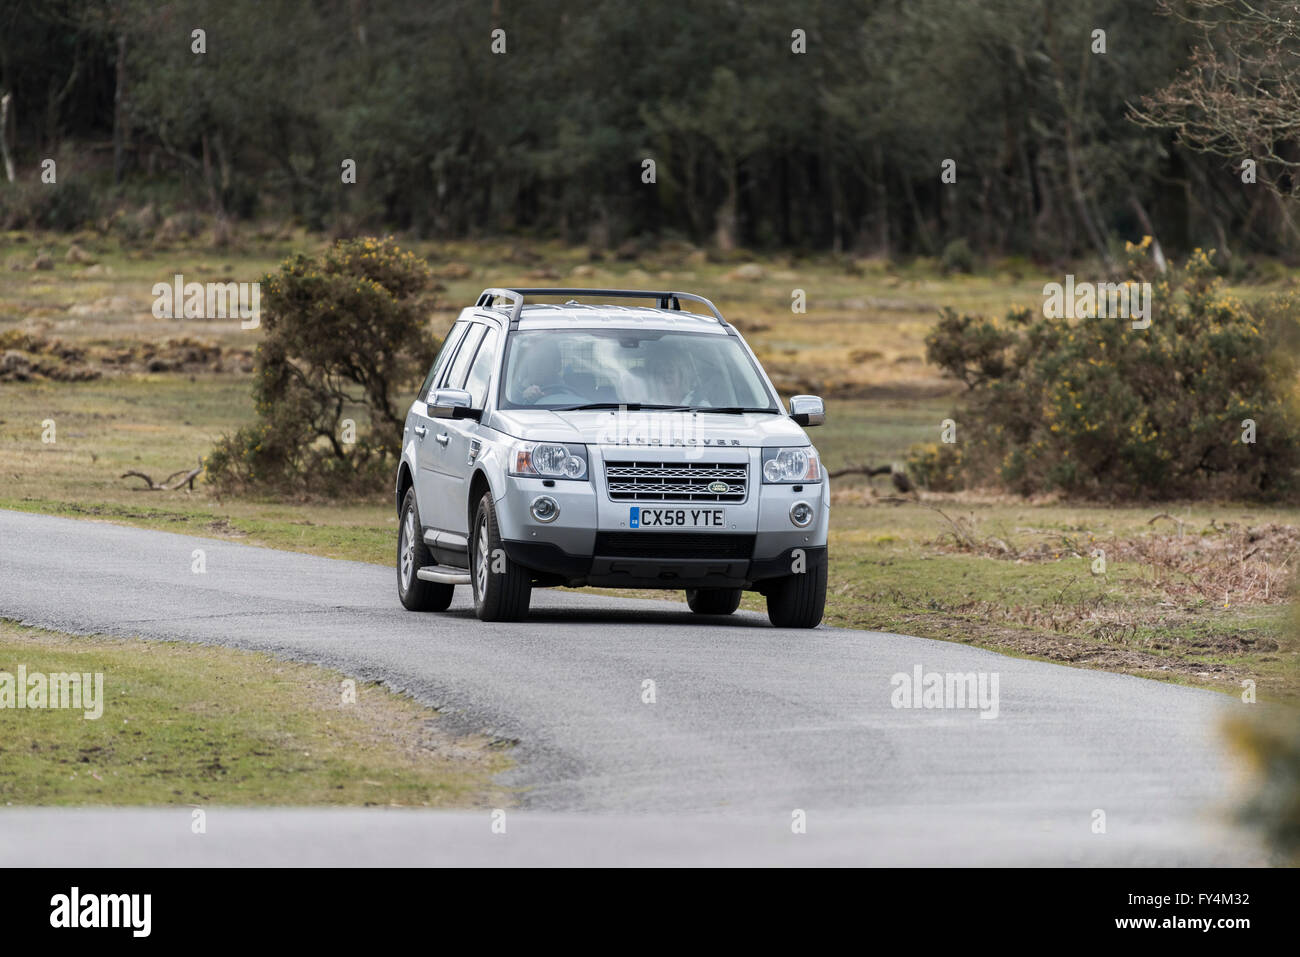 A Land Rover Freelander traveling along a road in the New Forest National Park, Hampshire, England, United Kingdom. Stock Photo